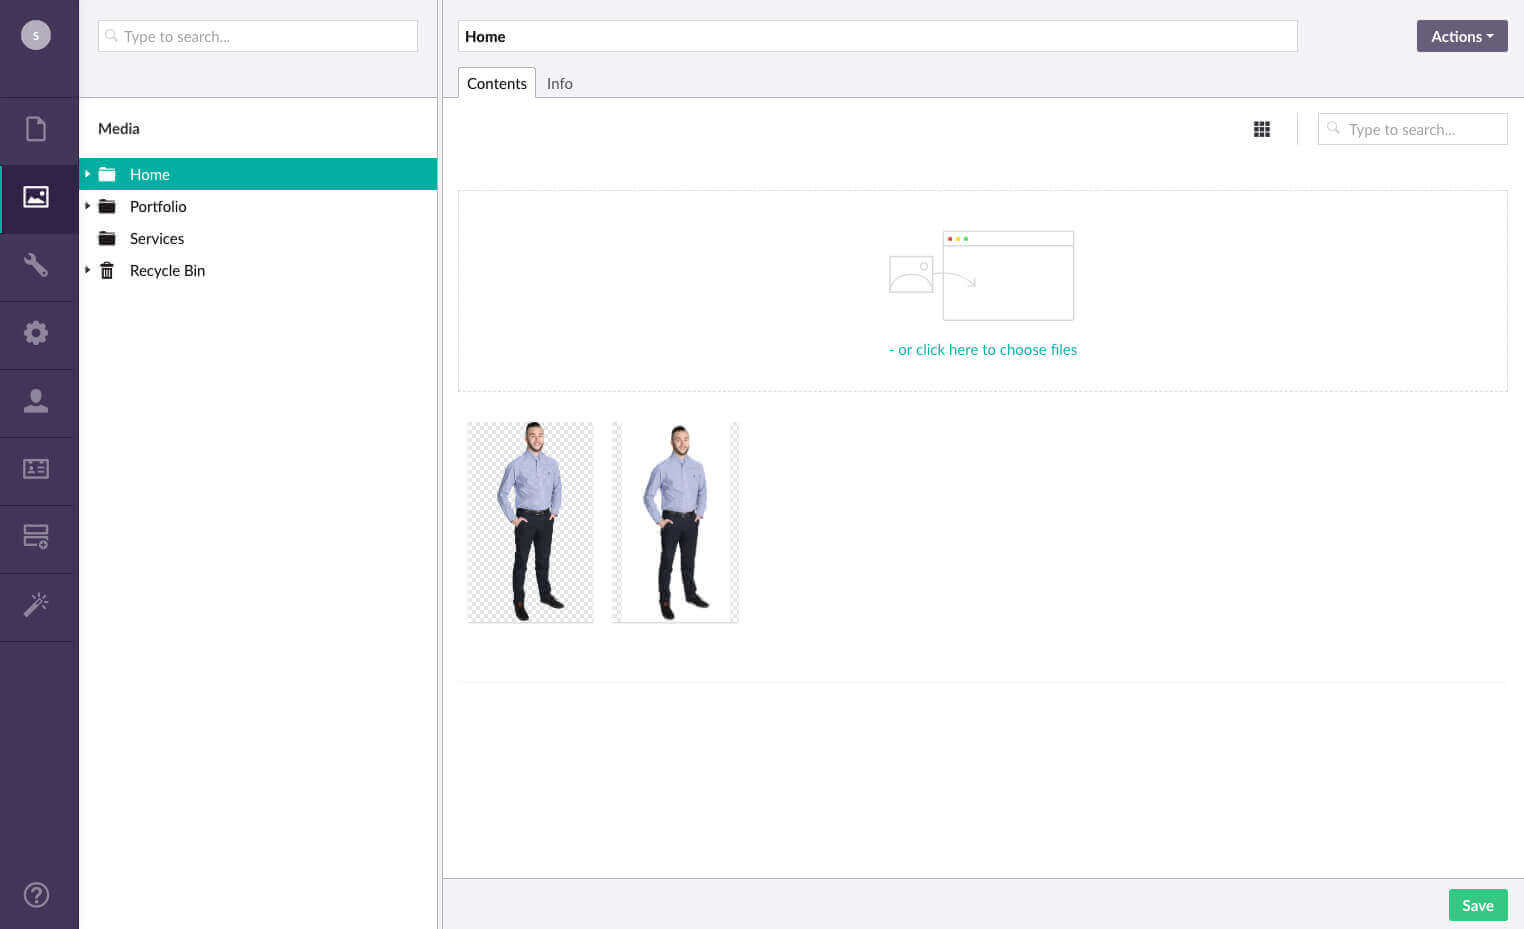 Easy to add images. Simply drag your images into the media tab in Umbraco.